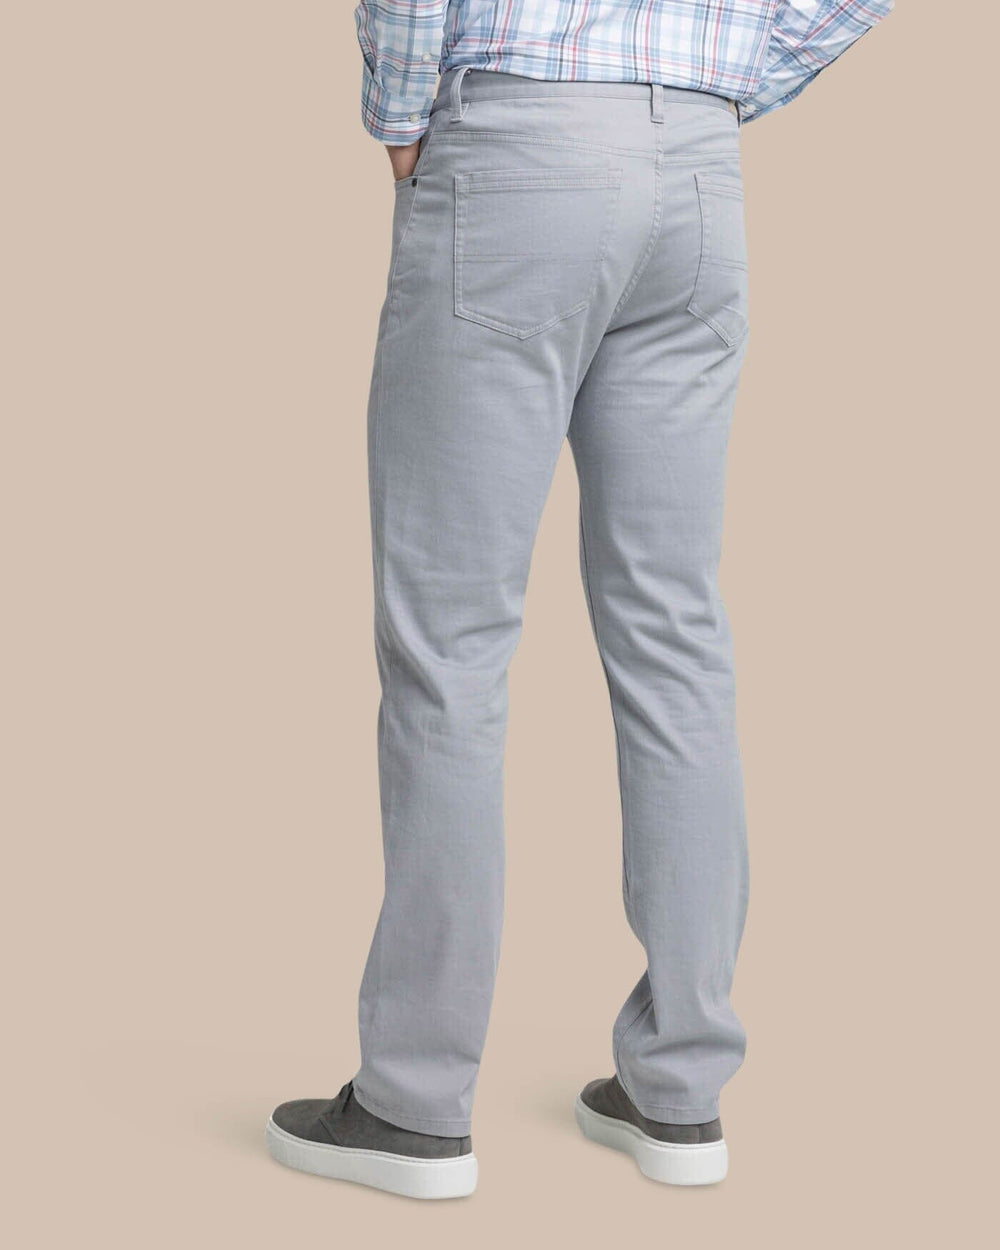 The back view of the Southern Tide Sullivan Five Pocket Pant by Southern Tide - Ultimate Grey